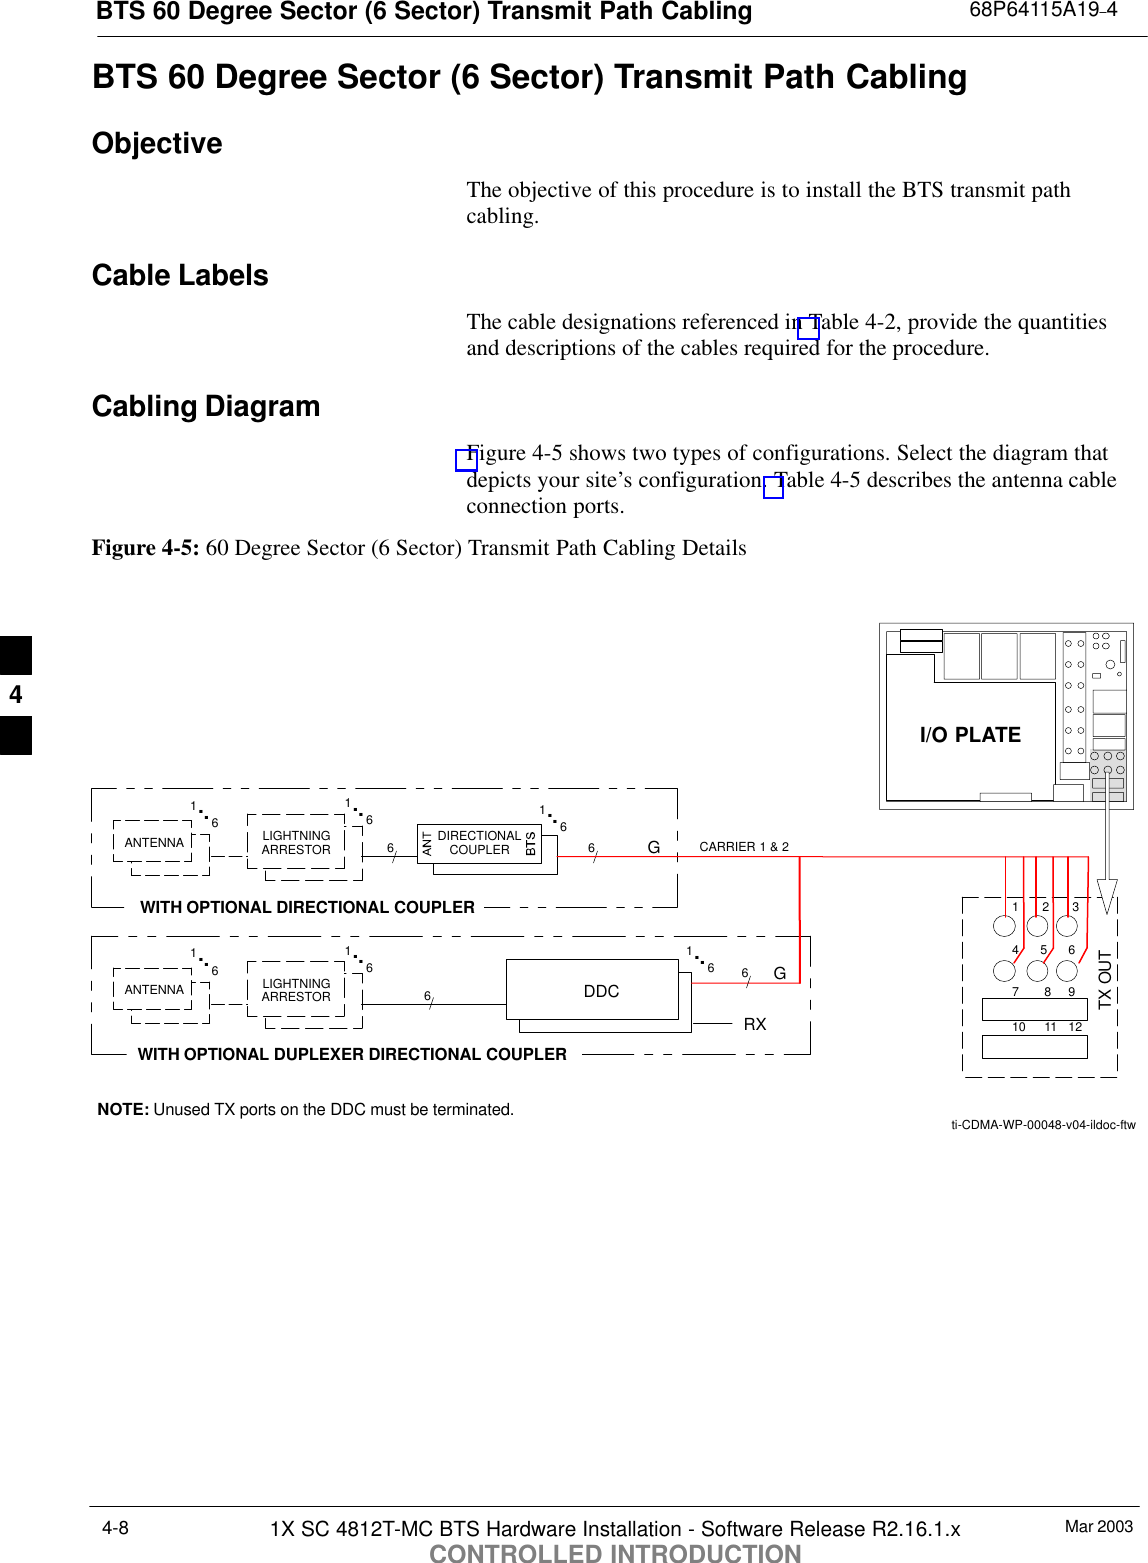 BTS 60 Degree Sector (6 Sector) Transmit Path Cabling 68P64115A19–4Mar 20031X SC 4812T-MC BTS Hardware Installation - Software Release R2.16.1.xCONTROLLED INTRODUCTION4-8BTS 60 Degree Sector (6 Sector) Transmit Path CablingObjectiveThe objective of this procedure is to install the BTS transmit pathcabling.Cable LabelsThe cable designations referenced in Table 4-2, provide the quantitiesand descriptions of the cables required for the procedure.Cabling DiagramFigure 4-5 shows two types of configurations. Select the diagram thatdepicts your site’s configuration. Table 4-5 describes the antenna cableconnection ports.Figure 4-5: 60 Degree Sector (6 Sector) Transmit Path Cabling DetailsTX OUTLIGHTNINGARRESTORANTENNAWITH OPTIONAL DIRECTIONAL COUPLERDIRECTIONALCOUPLER CARRIER 1 &amp; 2I/O PLATE61..61..61..6GLIGHTNINGARRESTORANTENNA61..61..61..WITH OPTIONAL DUPLEXER DIRECTIONAL COUPLER6G66RXNOTE: Unused TX ports on the DDC must be terminated.DDCti-CDMA-WP-00048-v04-ildoc-ftw12345678910 11 12 4